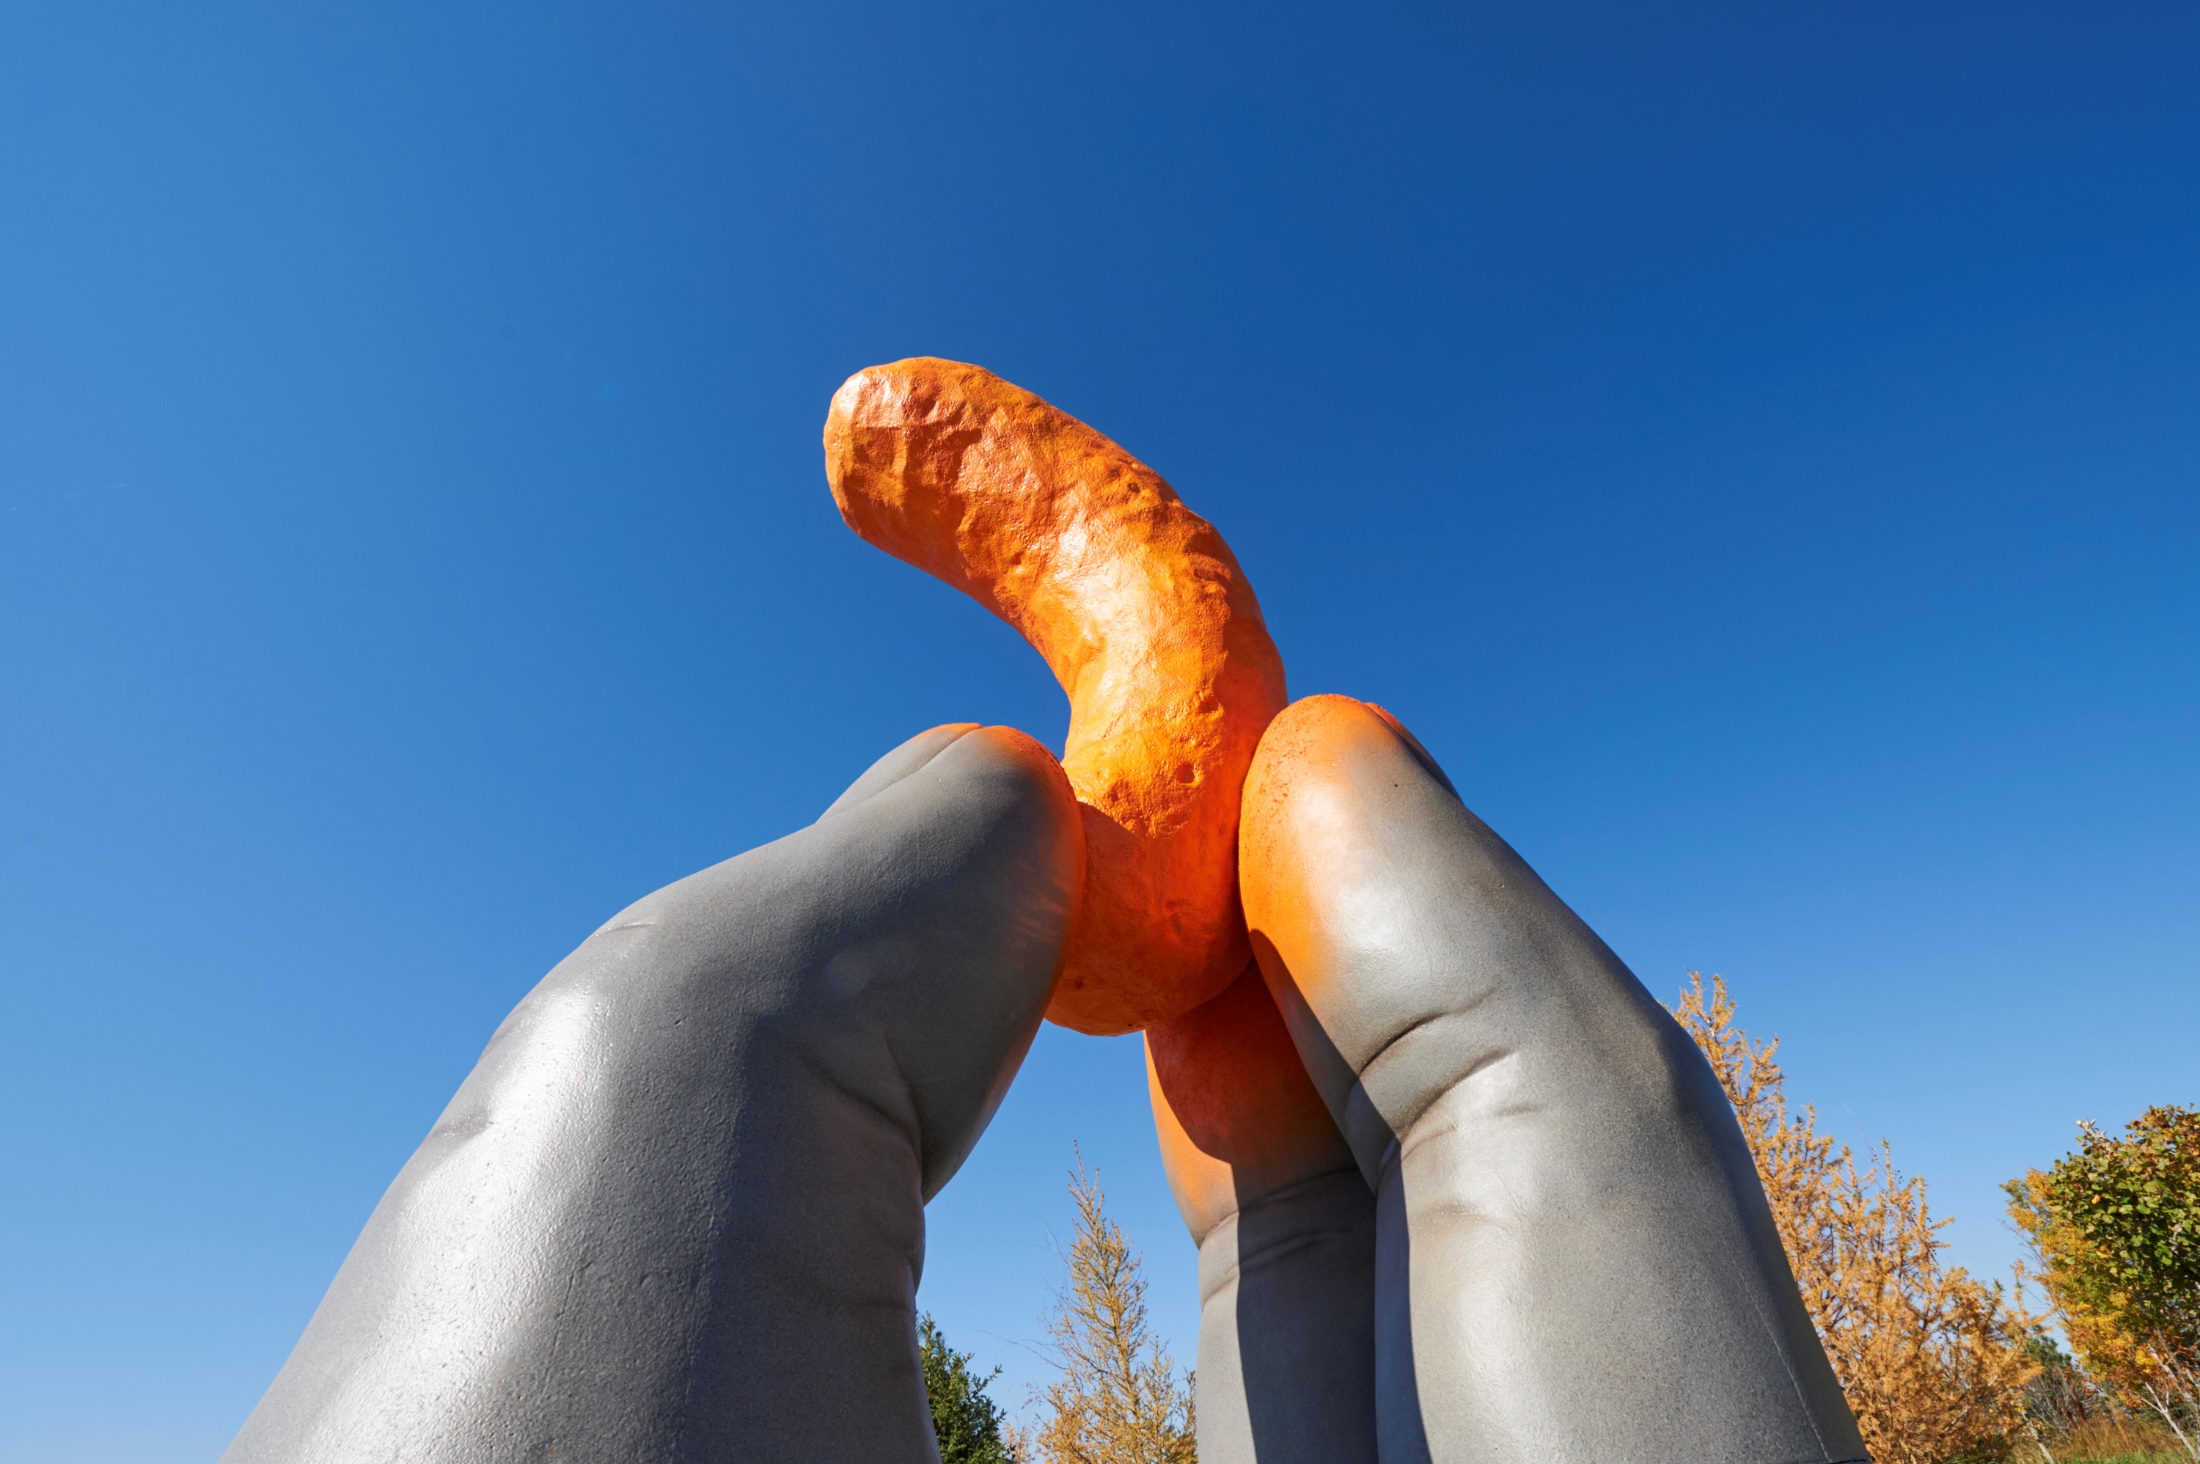  cheetos®-proudly-unveils-a-statue-to-commemorate-cheetle-the-official-term-for-the-brands-orange-dust